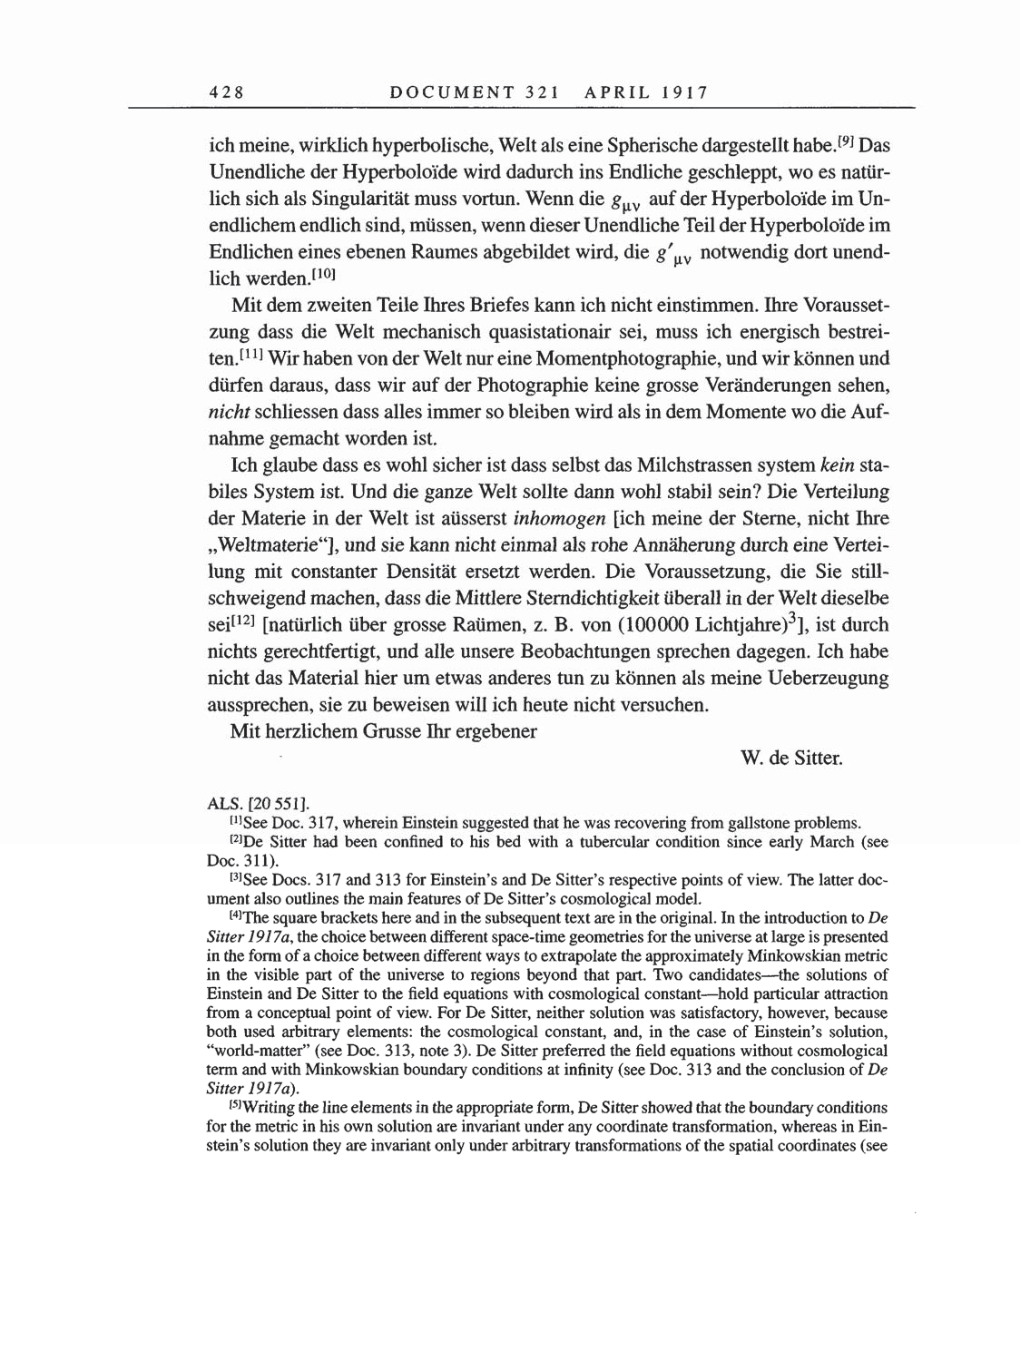 Volume 8, Part A: The Berlin Years: Correspondence 1914-1917 page 428